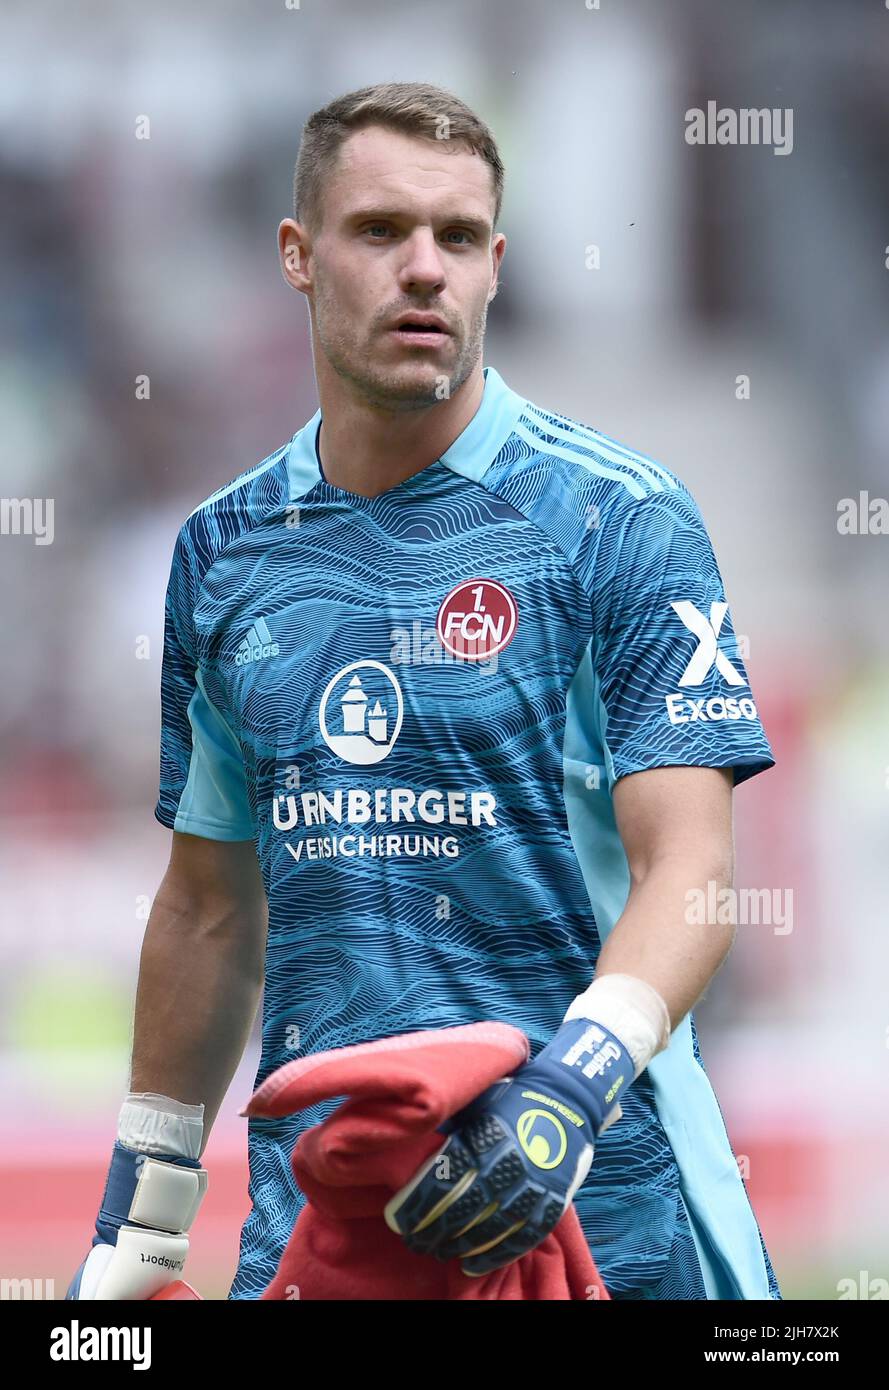 Germany. 16th July, 2022. 16 July 2022, Hamburg: Soccer: 2nd Bundesliga, Matchday 1, Hamburg, Millerntor-Stadion, FC St. Pauli - 1. FC Nürnberg, Nürnberg's goalkeeper Christian Mathenia shows his disappointment after conceding three goals. Photo: Michael Schwartz/dpa - IMPORTANT NOTE: In accordance with the requirements of the DFL Deutsche Fußball Liga and the DFB Deutscher Fußball-Bund, it is prohibited to use or have used photographs taken in the stadium and/or of the match in the form of sequence pictures and/or video-like photo series. Credit: dpa picture alliance/Alamy Live News Stock Photo